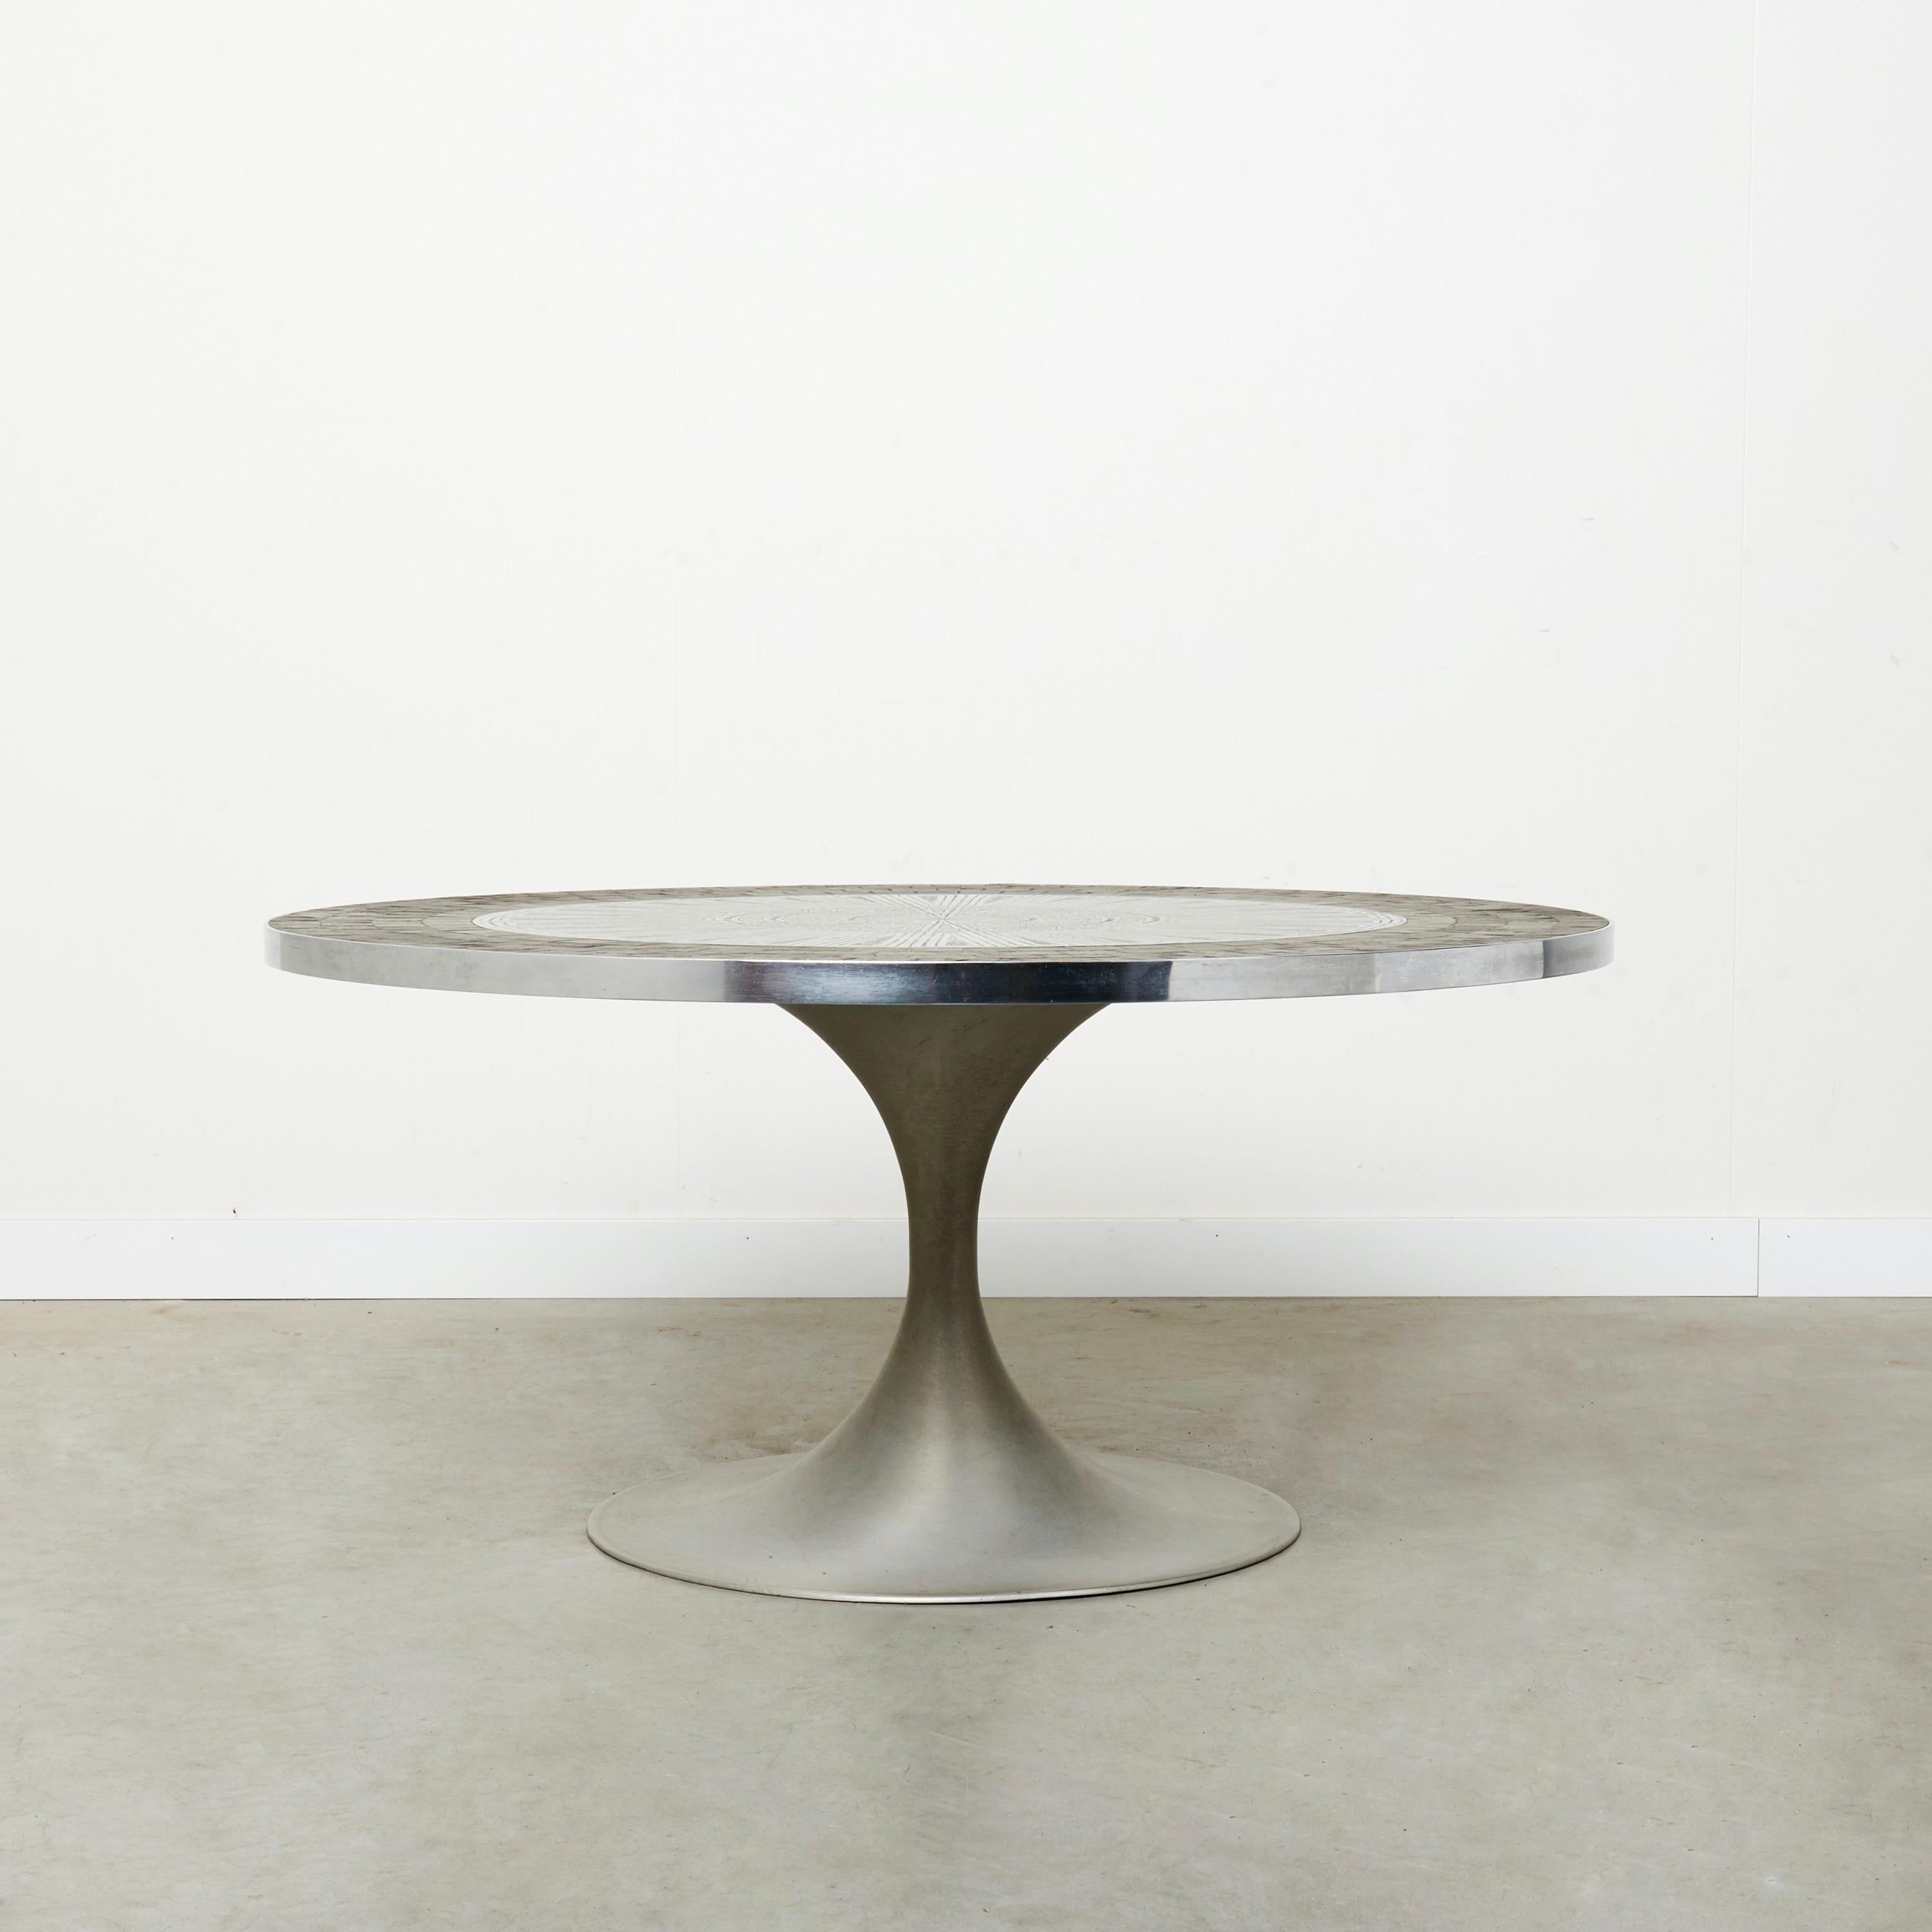 Mid Century coffee table by Heinz Lilienthal, Germany 1970s.
Mosaic slate stone and aluminium table top. Steel base.
Table is in a good vintage condition. Base and table top with patina and signs of use like small scratches and stains.